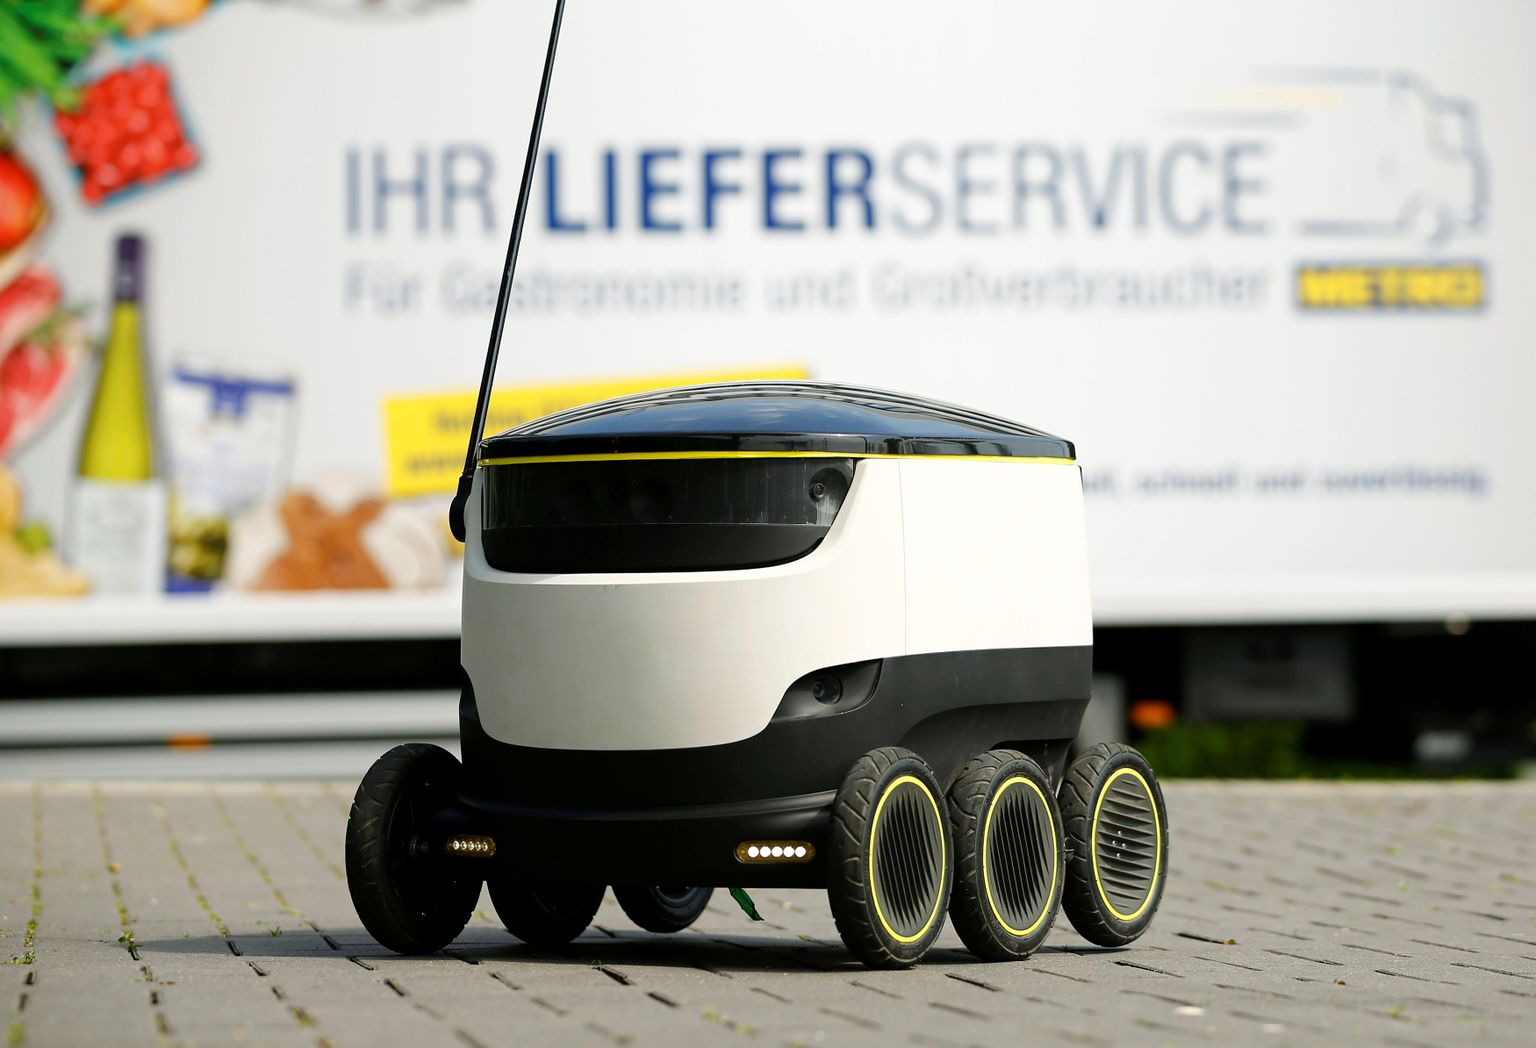 A conventional delivery truck of Germany's biggest retailer Metro AG stands behind the world's first commercial delivery robot of Starship Technologies during a demonstration at Metro's headquarter in Duesseldorf, Germany, June 7, 2016. The six-wheels electrical delivery robot designed by the Skype founders Ahti Heinla and Janus Friis can autonomously navigate and carry a maximum load of 20 kilograms over a distance of six kilometres from its base station at a maximum speed of 6 km/h.  REUTERS/Wolfgang Rattay